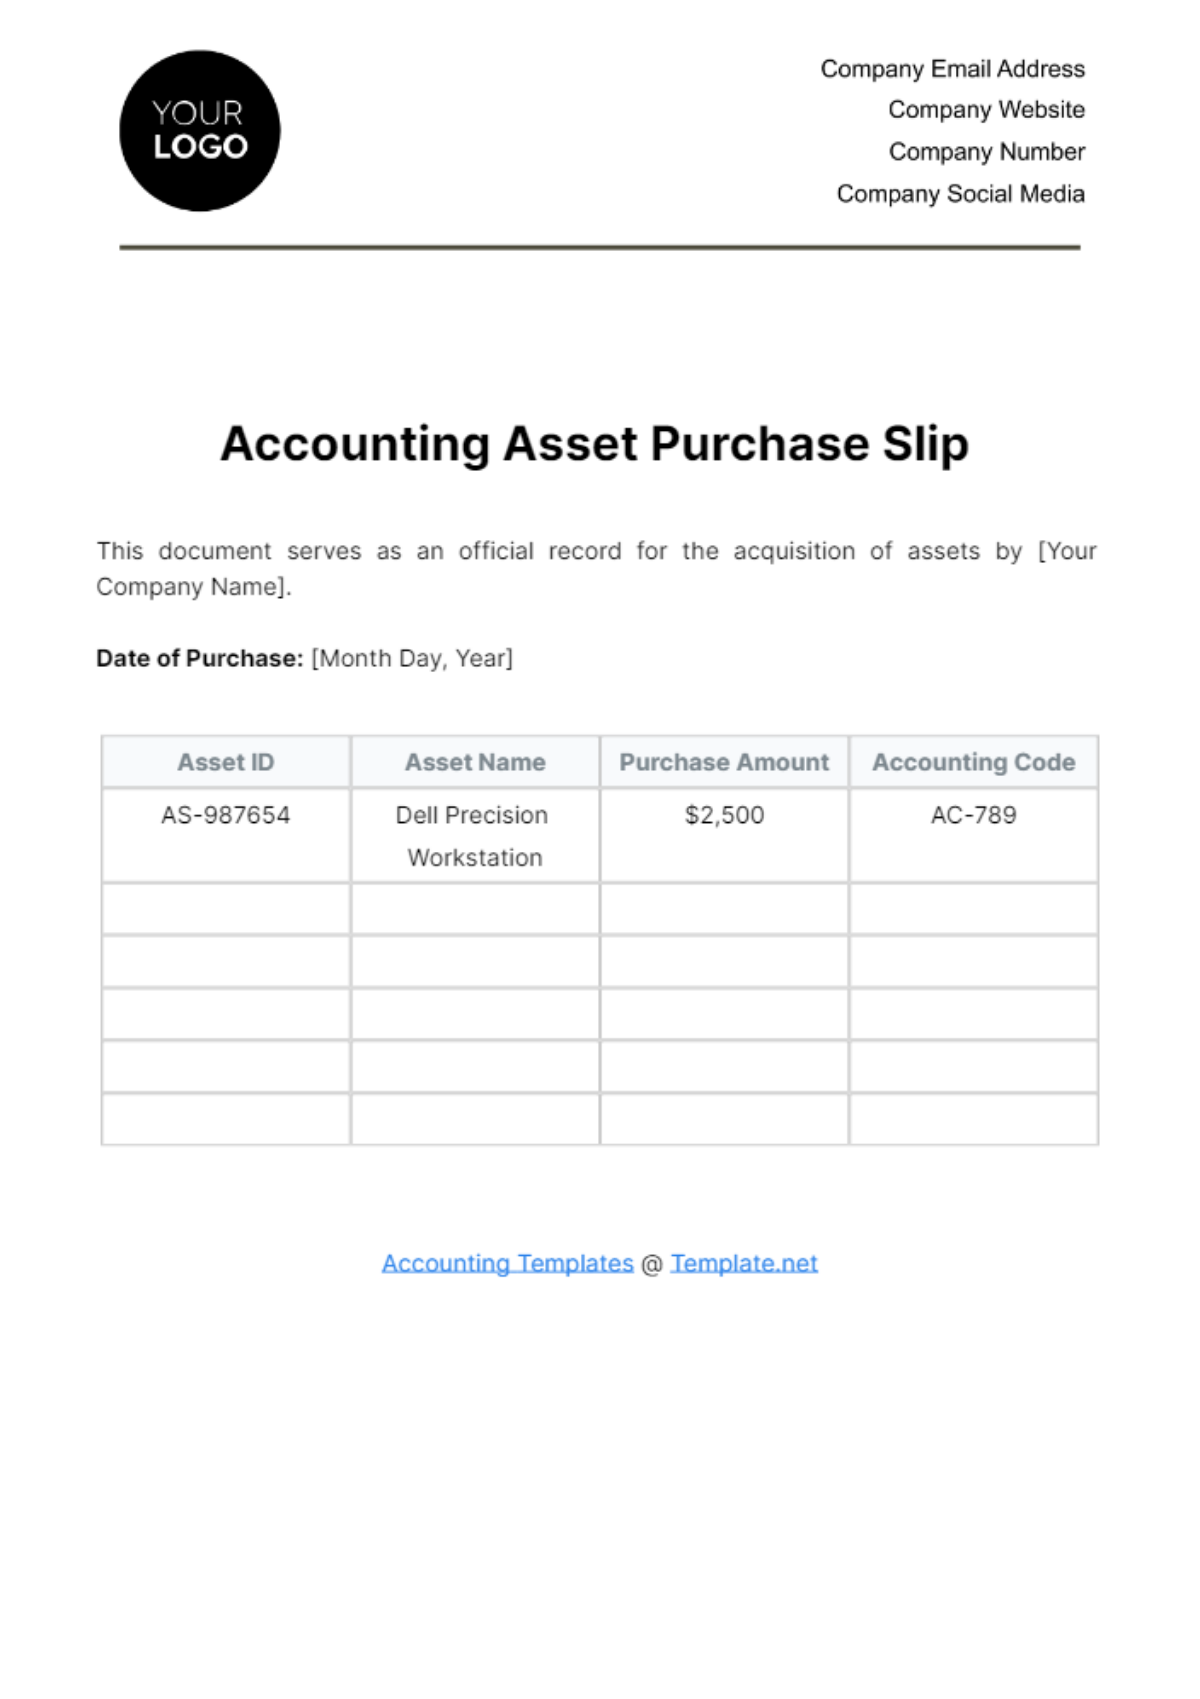 Accounting Asset Purchase Slip Template